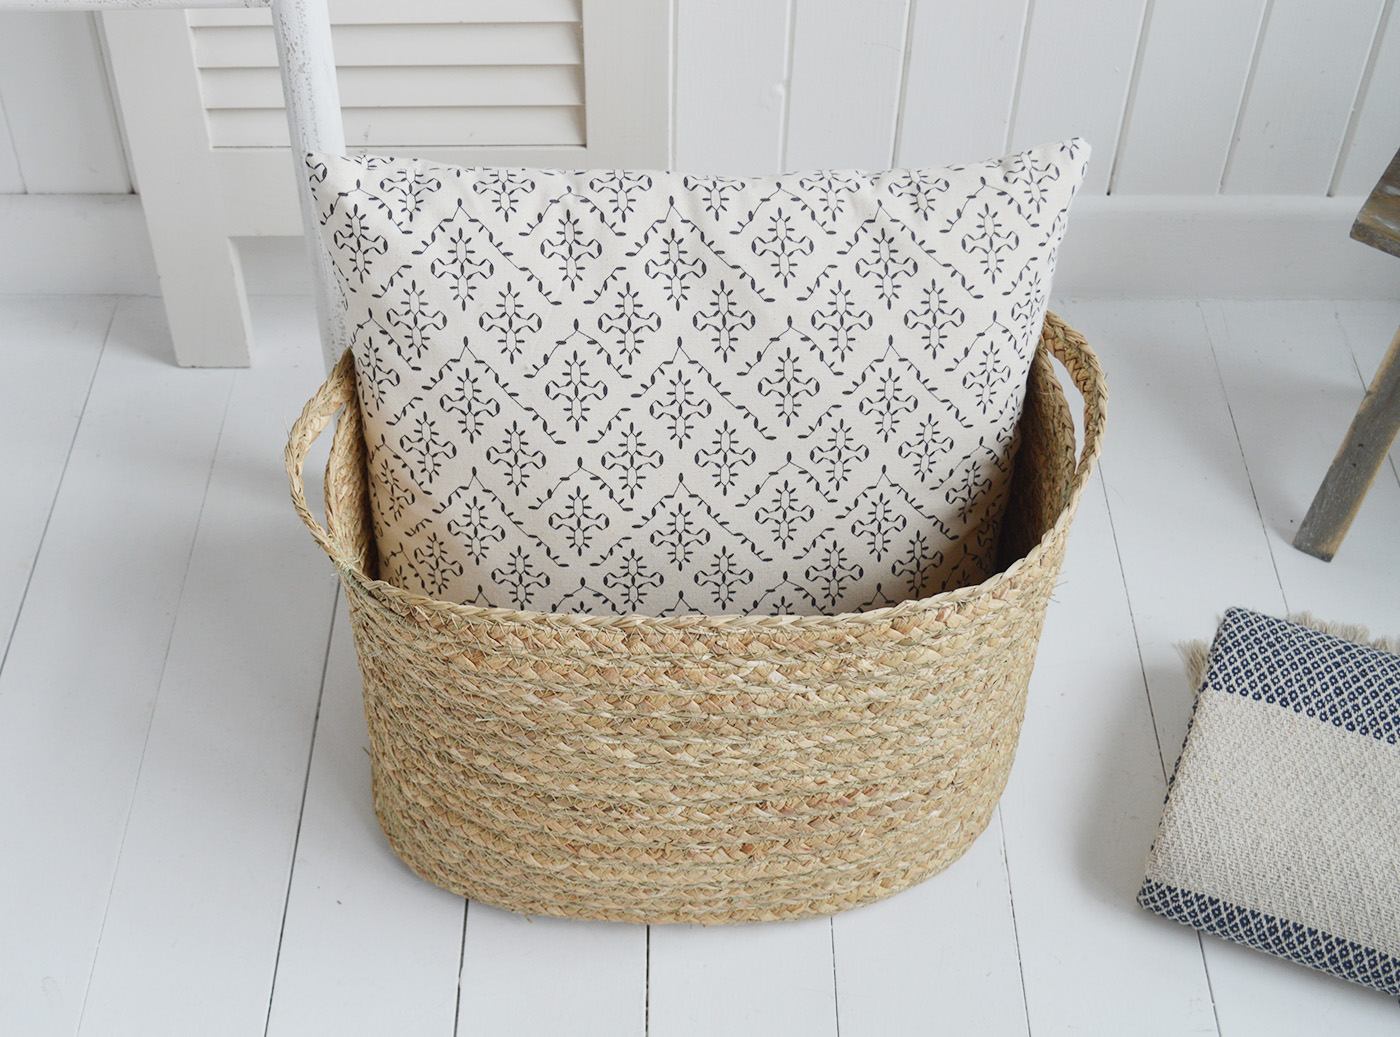 Freeport Maize rectangle basket with handles for logs, toys and everyday storage from The White Lighthouse Furniture and Home Interiors for New England, country, coastal and city homes for hallway, living room, bedroom and bathroom